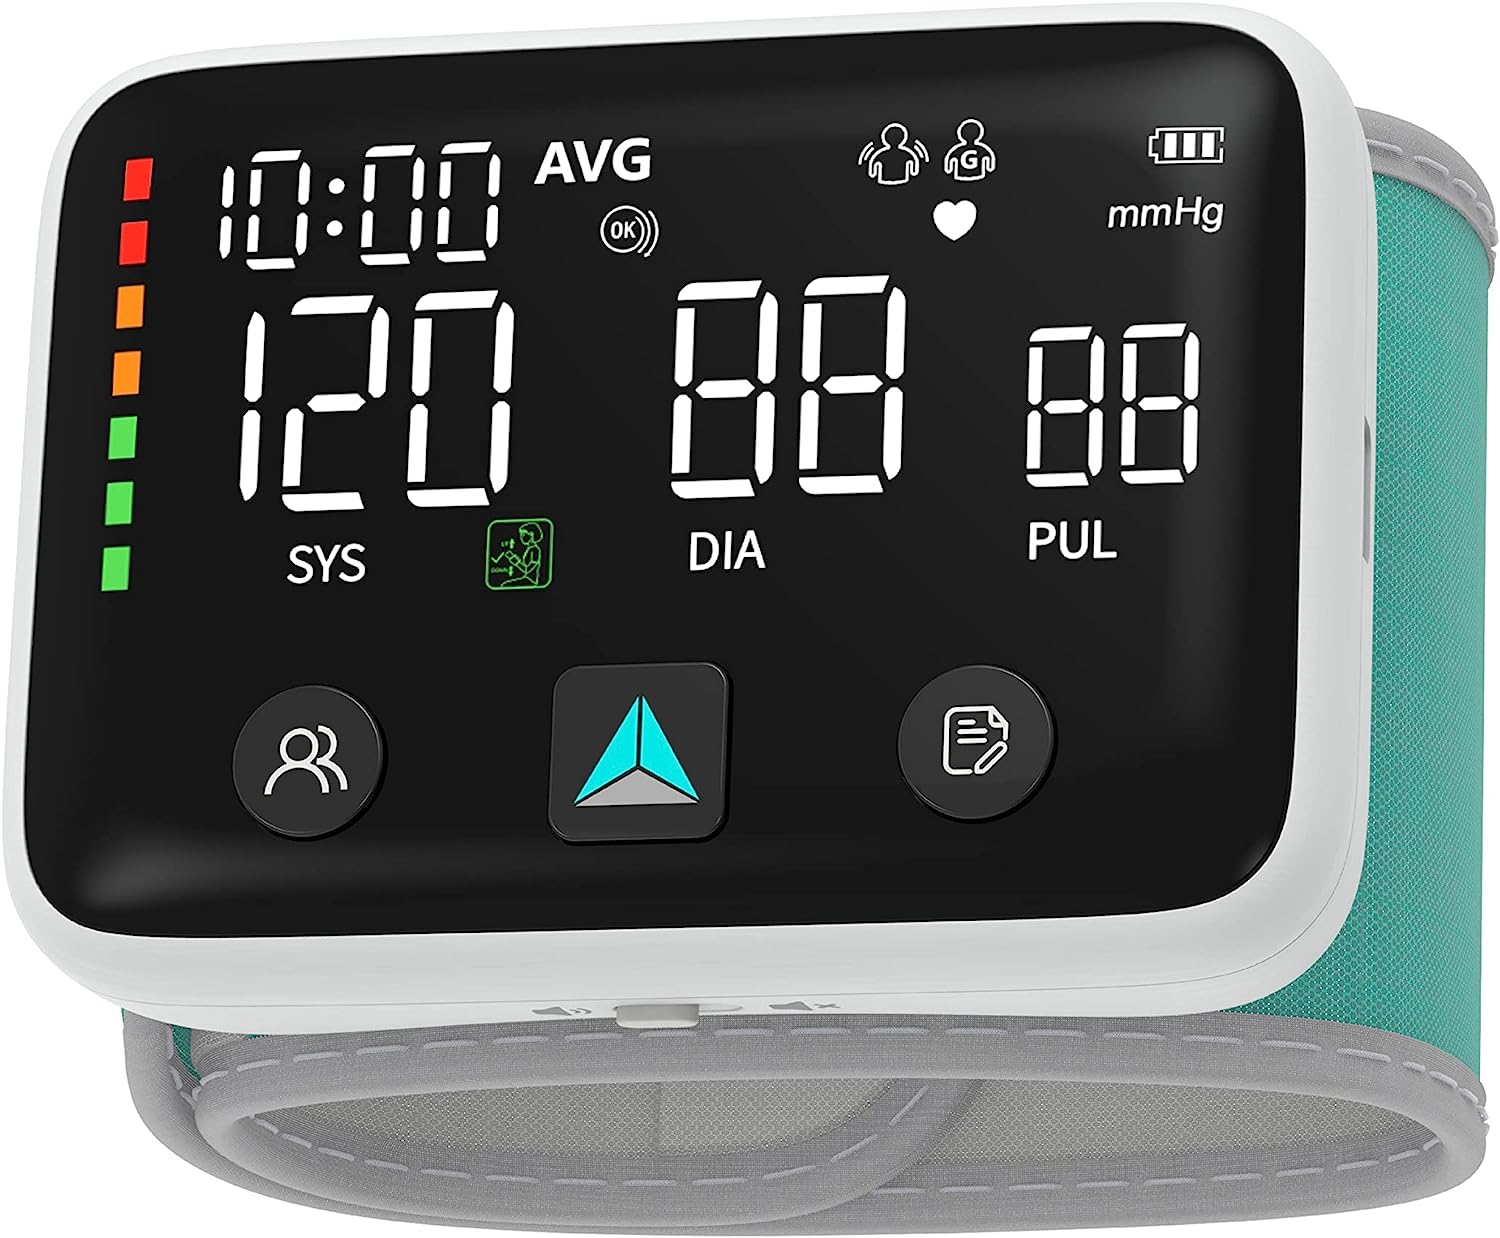 position for wrist blood pressure monitor detailed review